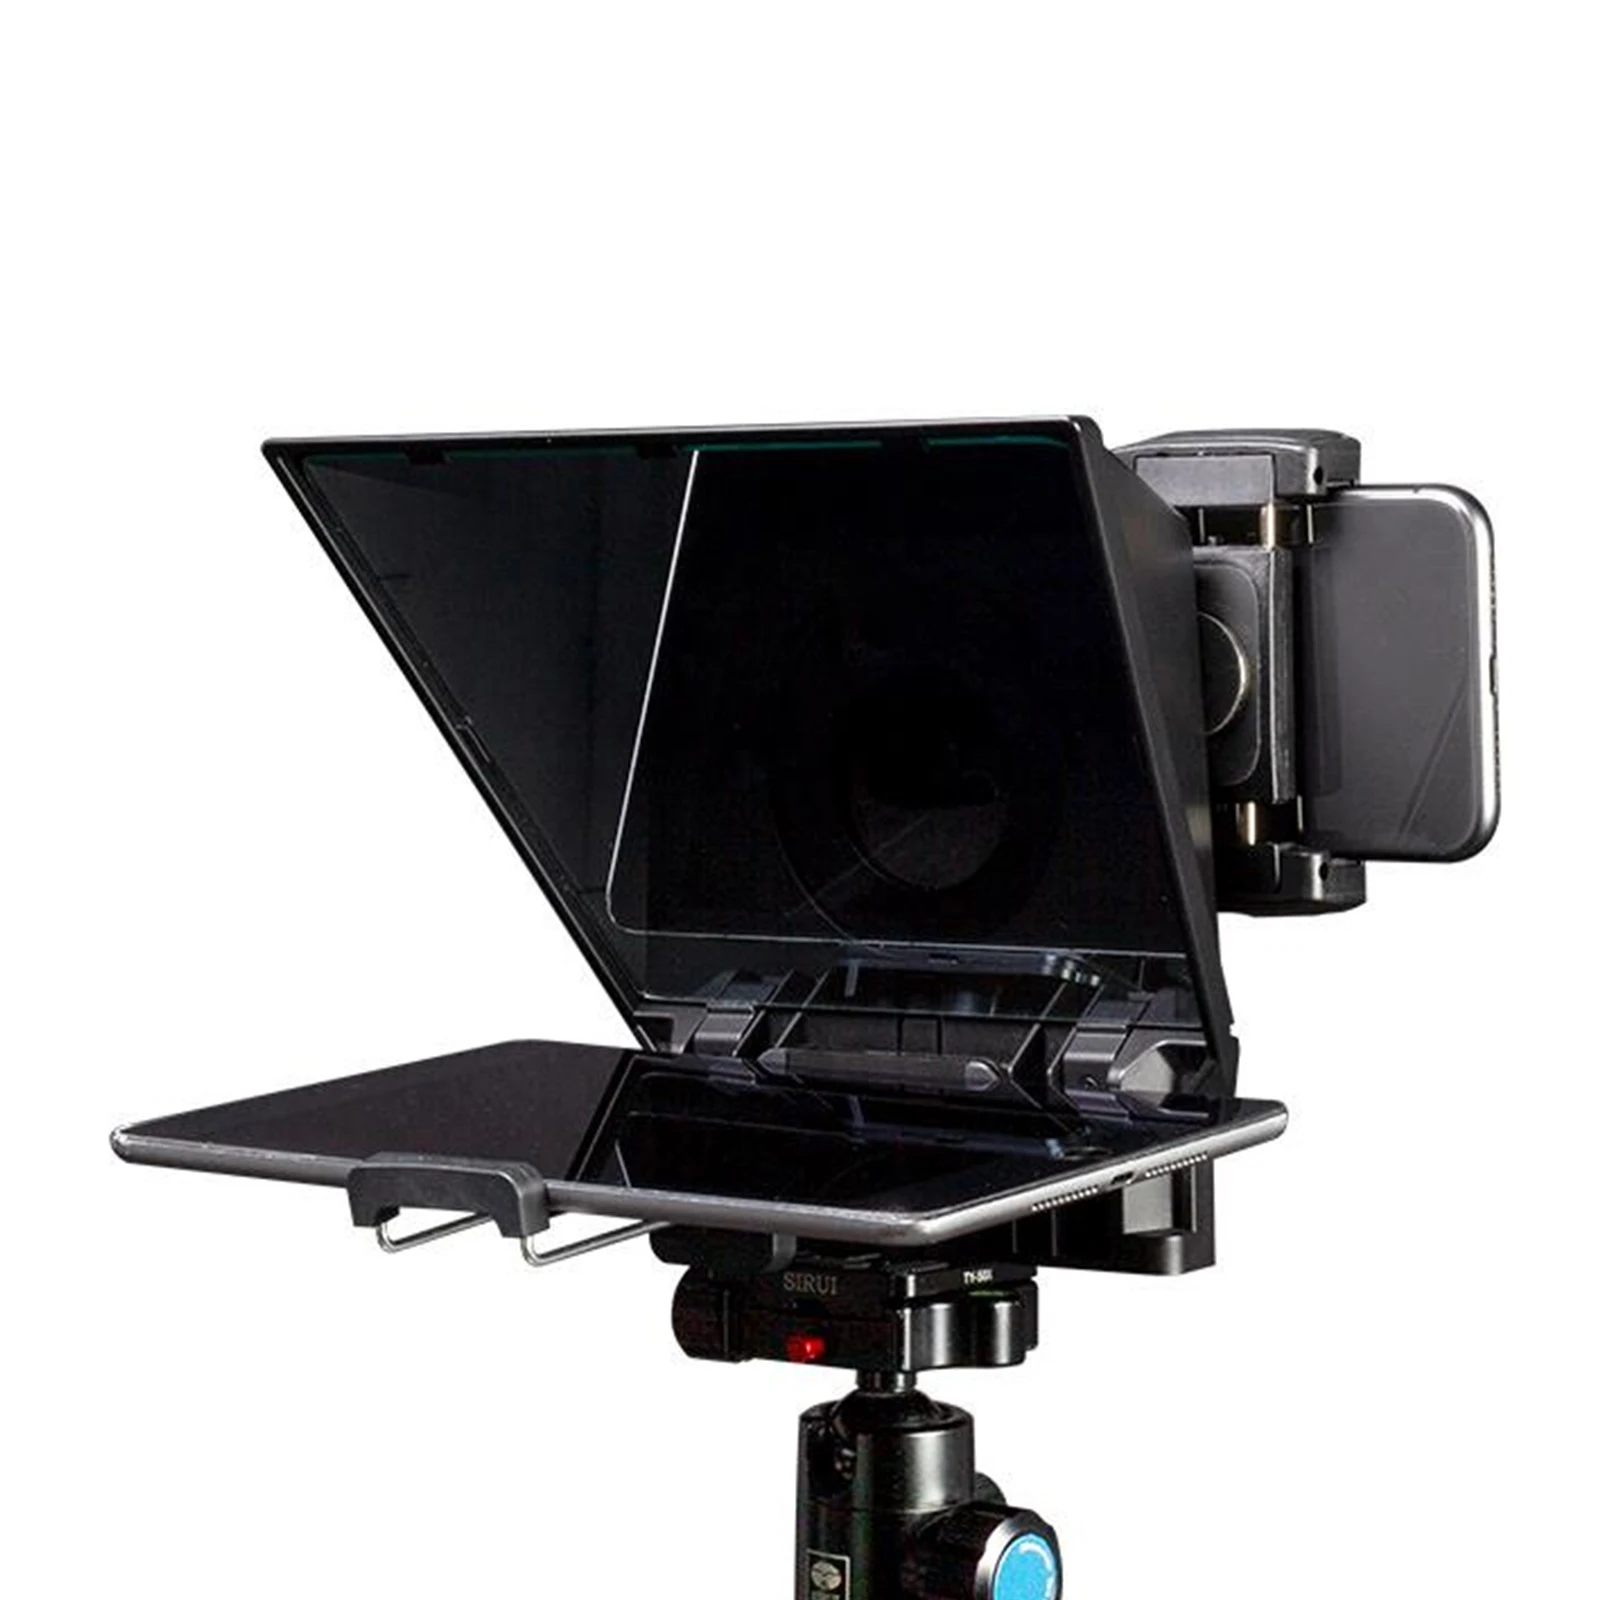 

Camkoo Teleprompter for 8 inch Tablet iPad Phones Prompter Outdoor Interview Speech DSLR Reader prompter Table